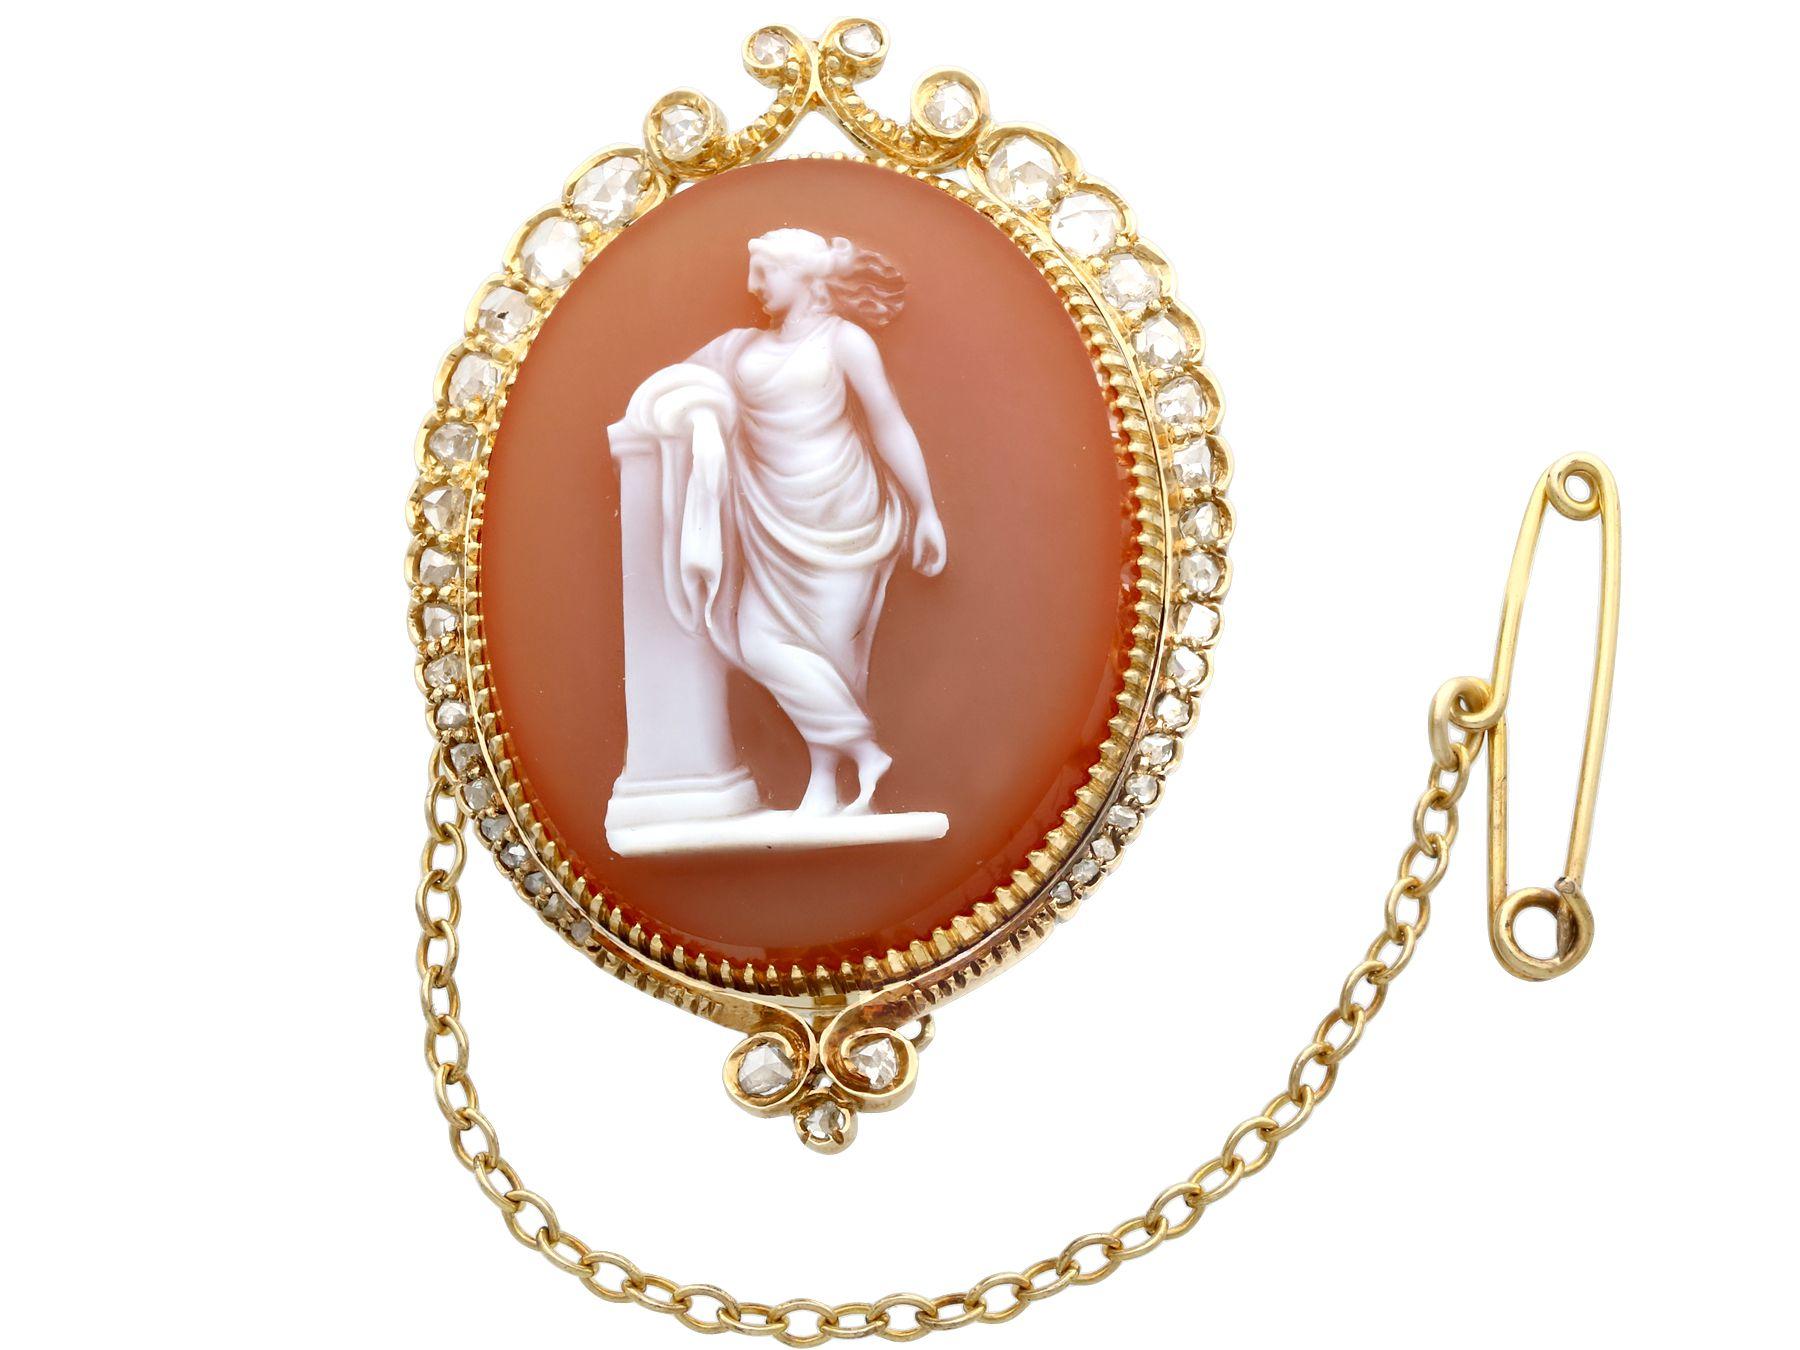 A stunning, fine and impressive antique hardstone and 0.68ct diamond, 18 karat yellow gold cameo brooch; part of our diverse antique jewellery and estate jewelry collections.

This fine and impressive antique brooch with diamonds has been crafted in